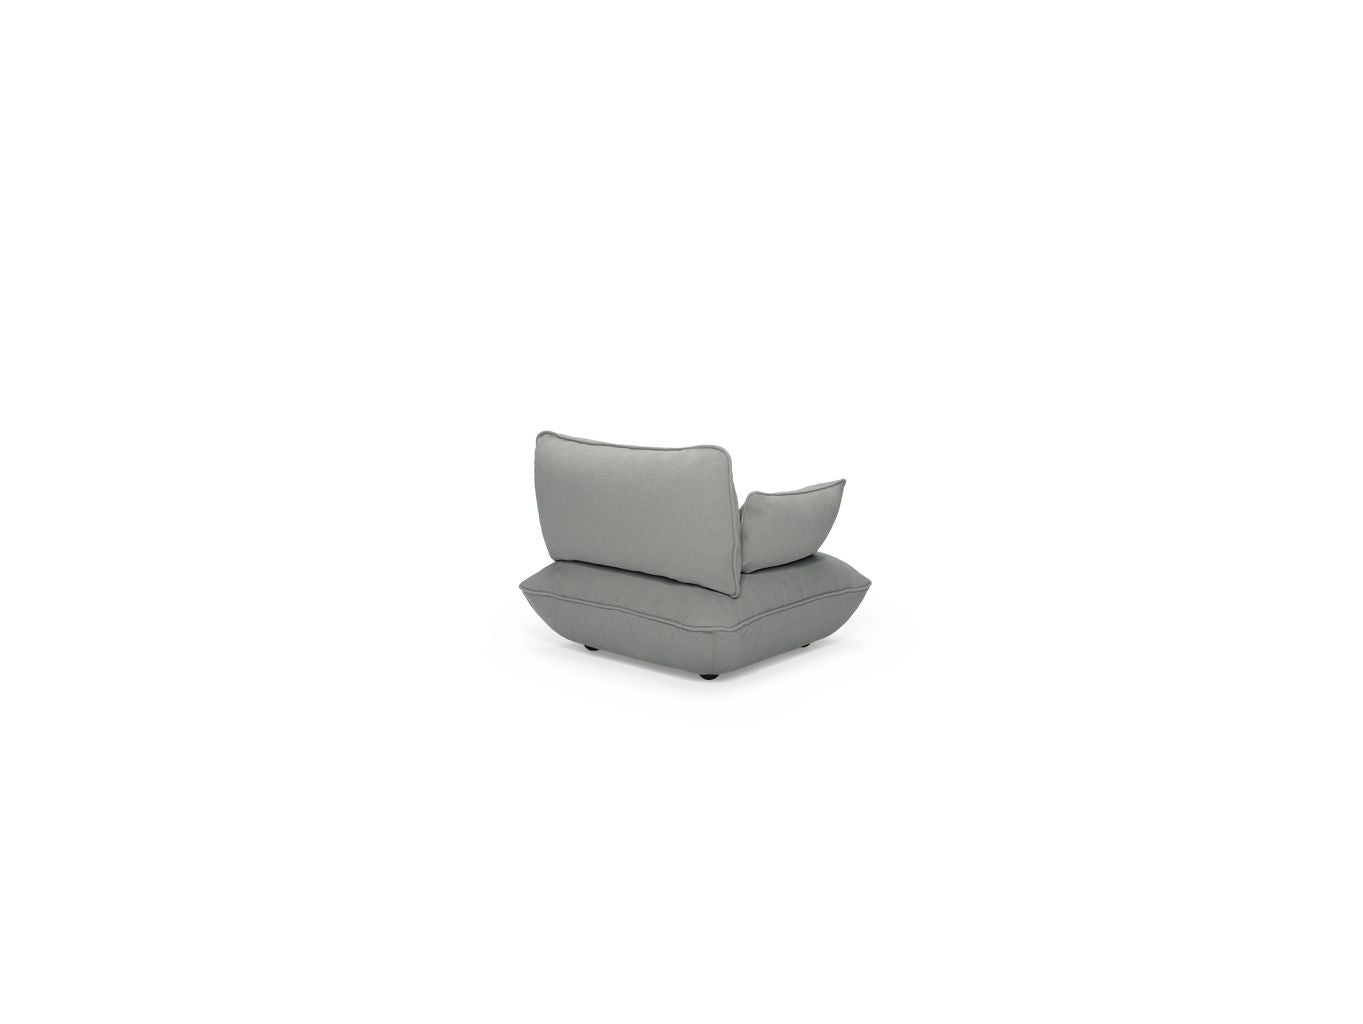 Fatboy Sumo Loveseat, Mouse Gray